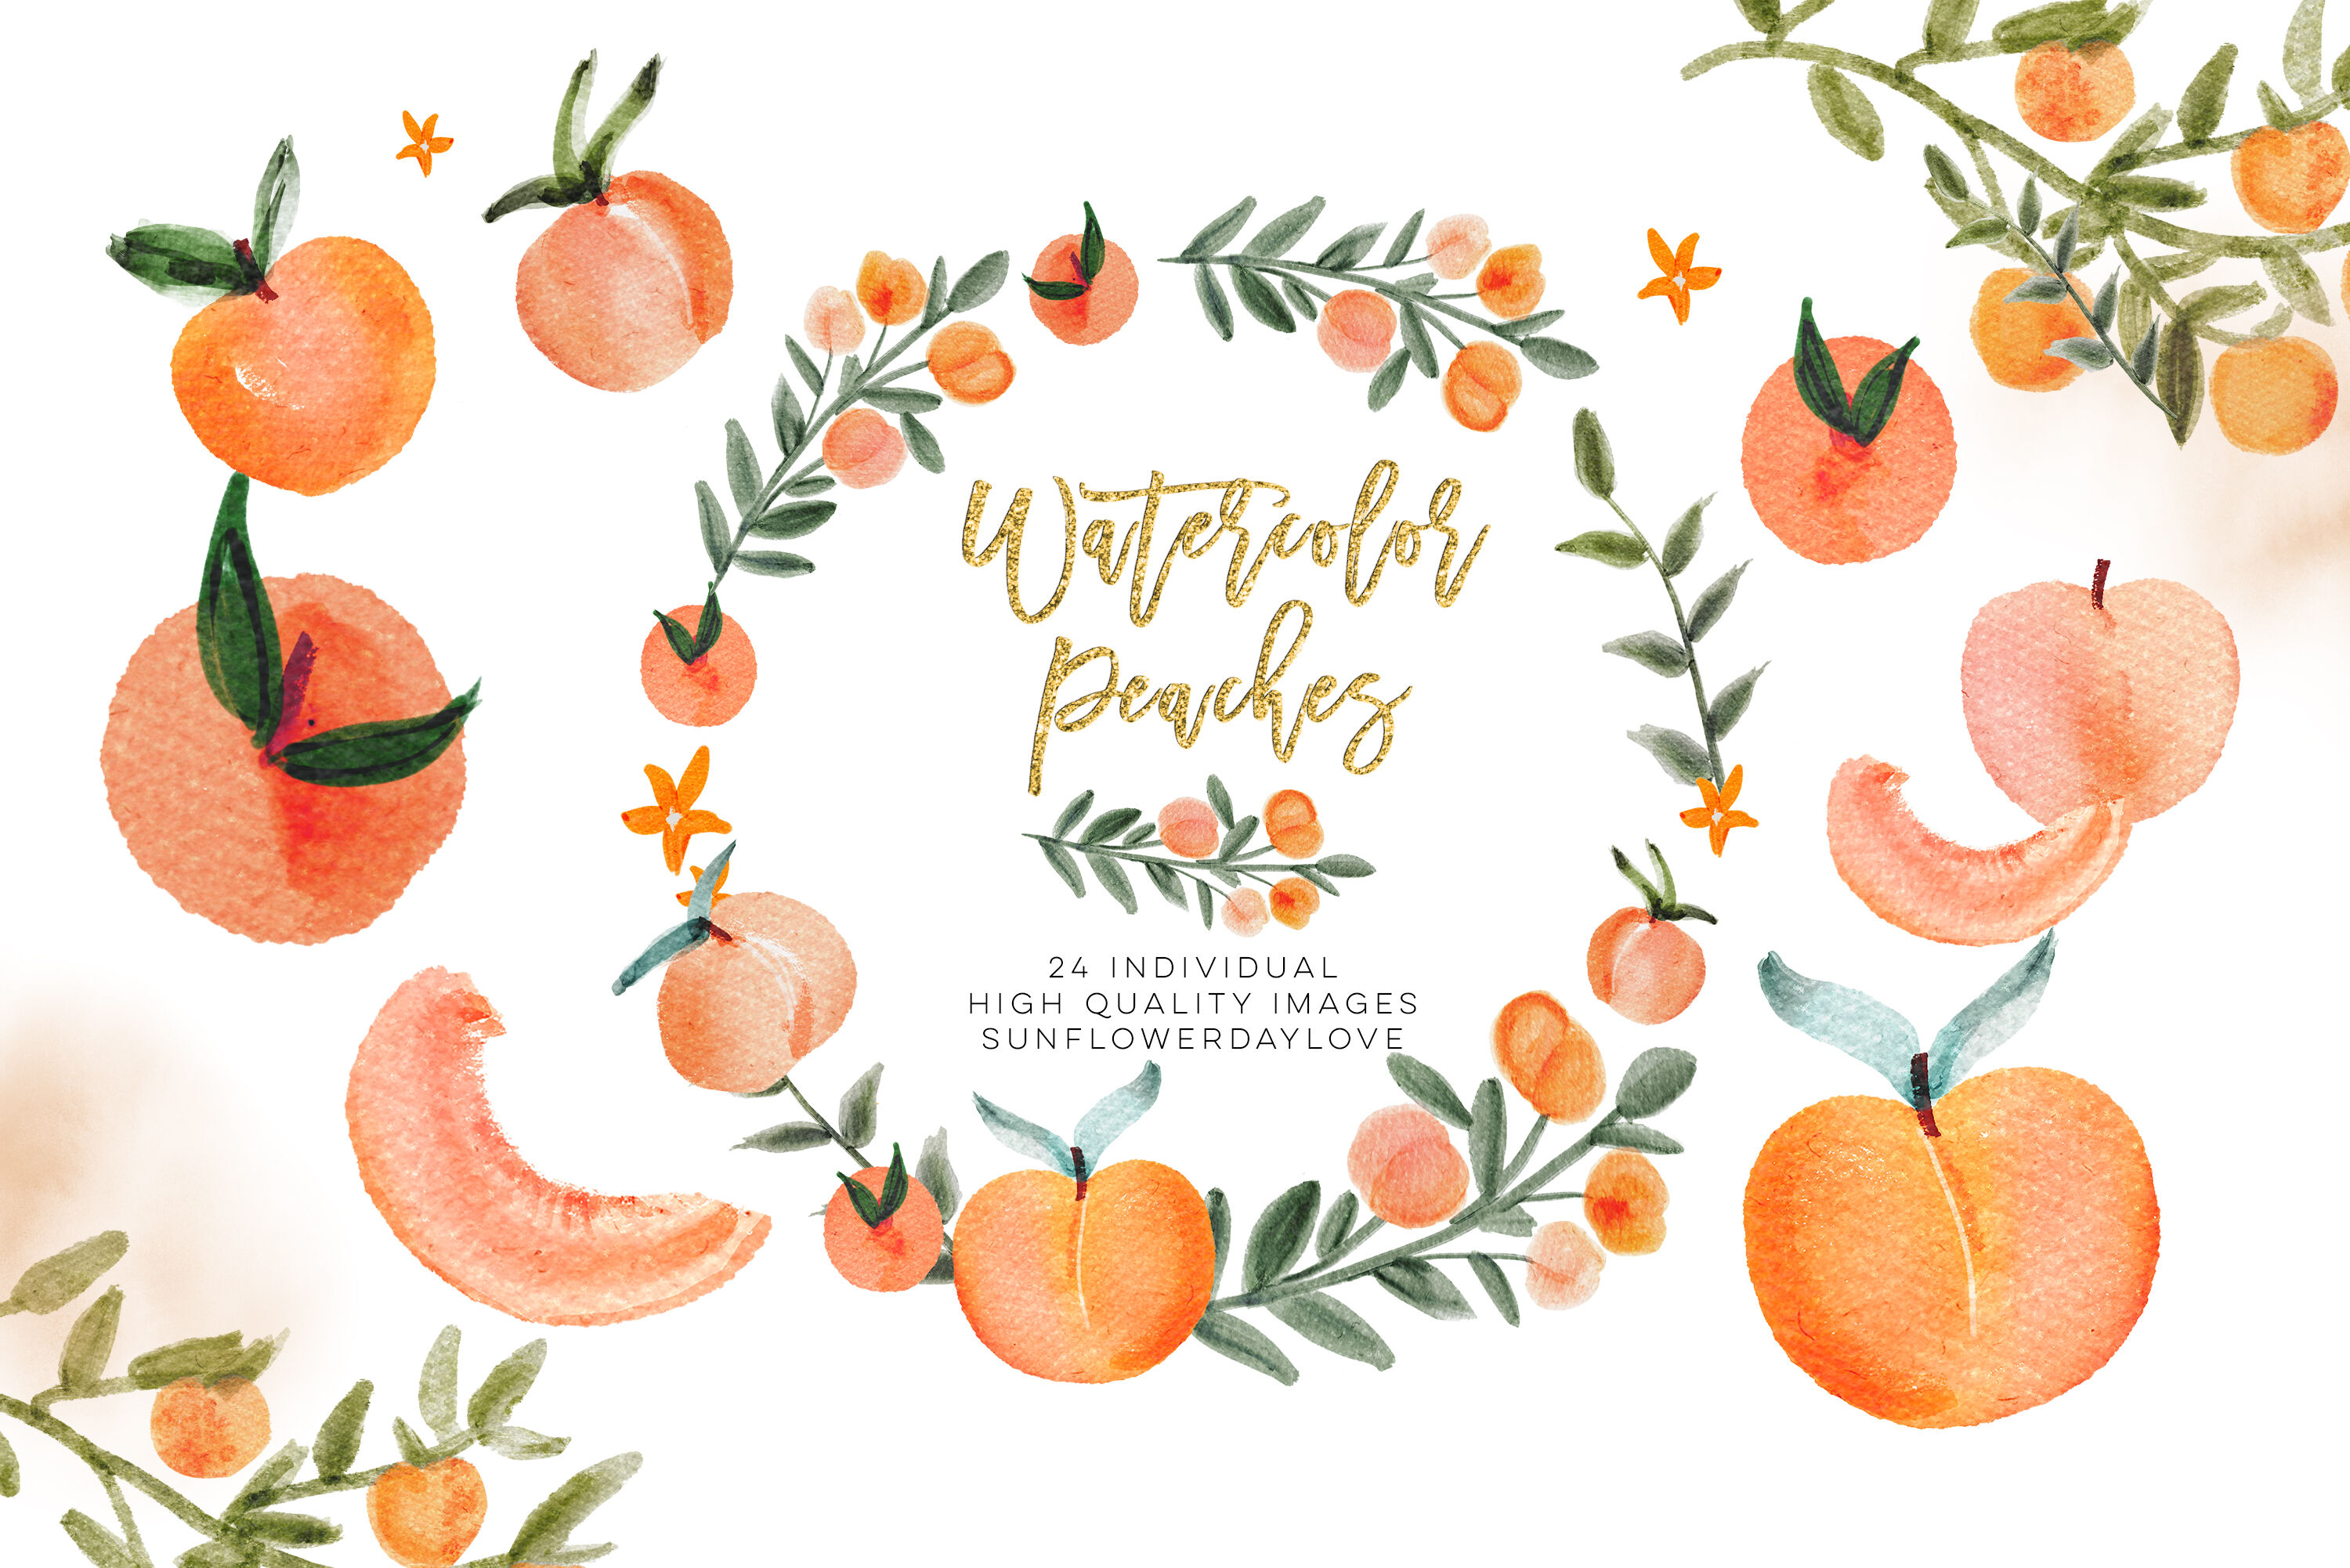 Watercolor Peach Clip Art Peach Leaves Clipart By Sunflower Day Love Thehungryjpeg 6614